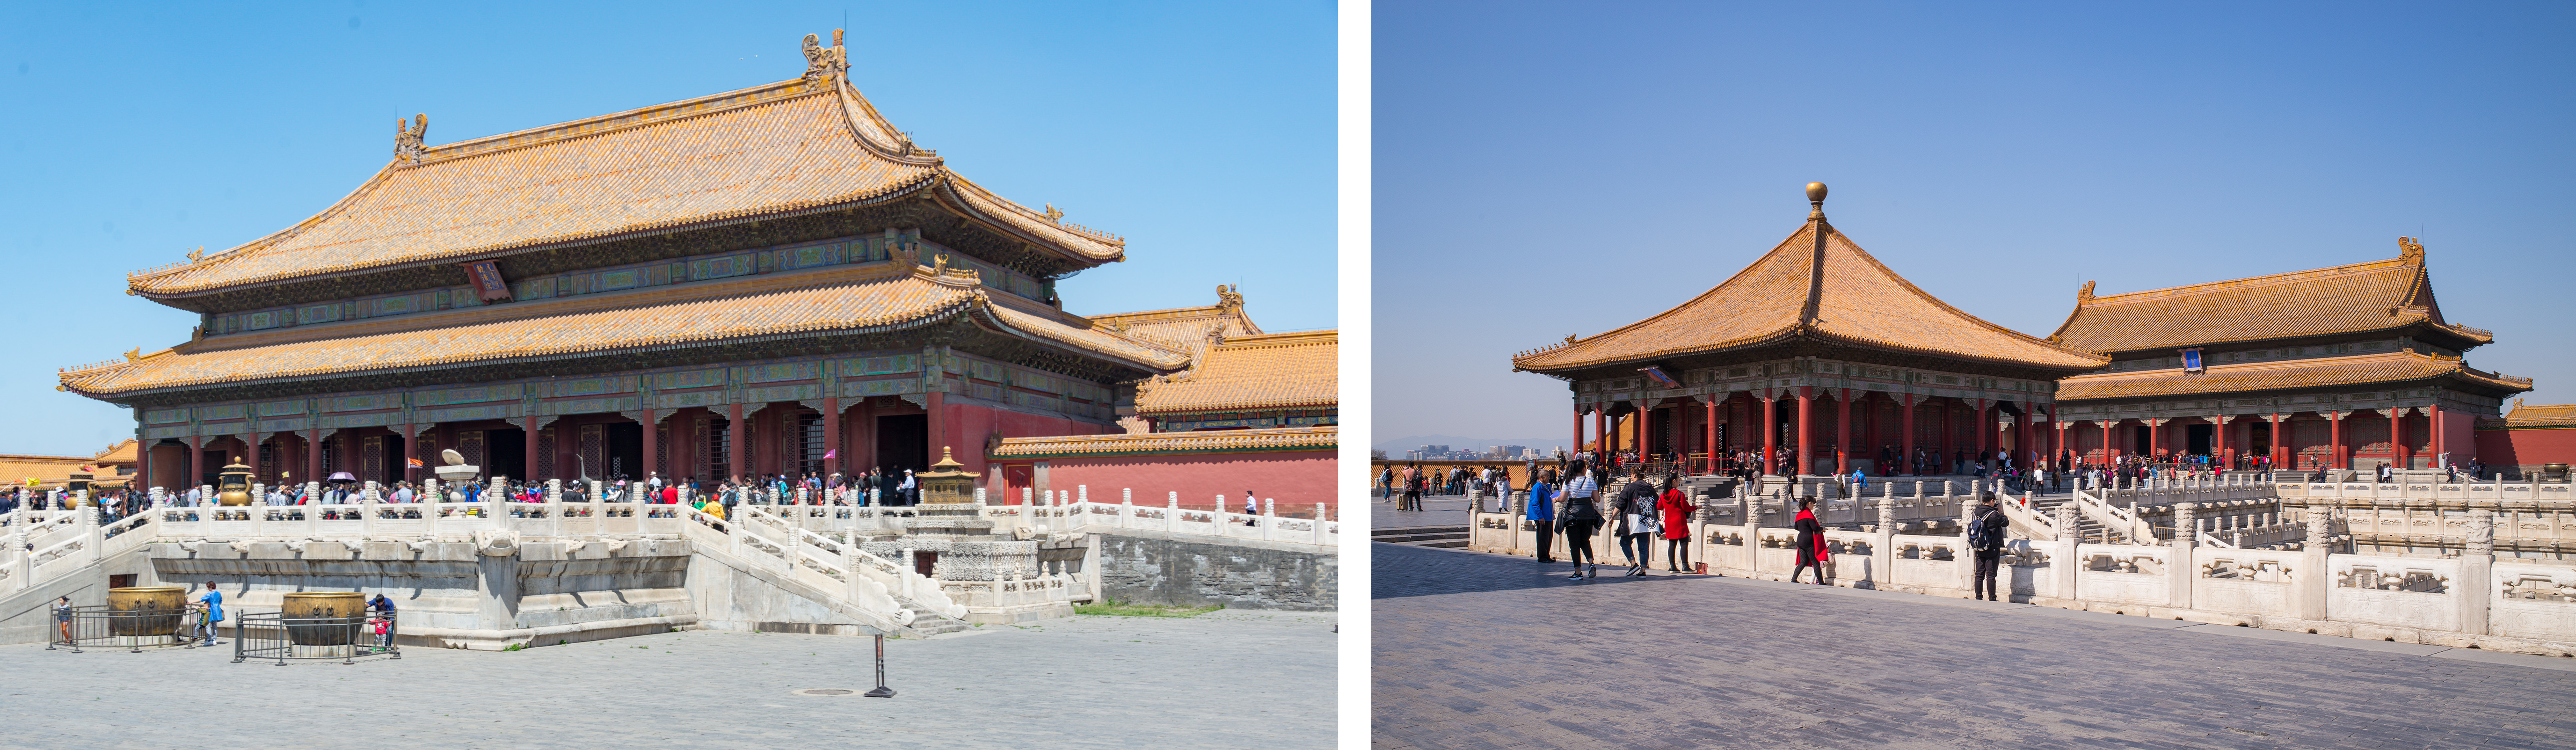 Left: Palace of Heavenly Purity (Qianqinggong), Forbidden City, Beijing (photo: Xiquinho Silva, CC BY 2.0); Left: Hall of Celestial and Terrestrial Union (Jiaotaidian) and Palace of Earthly Tranquility (Kunninggong) (photo: R Boed, CC BY 2.0)